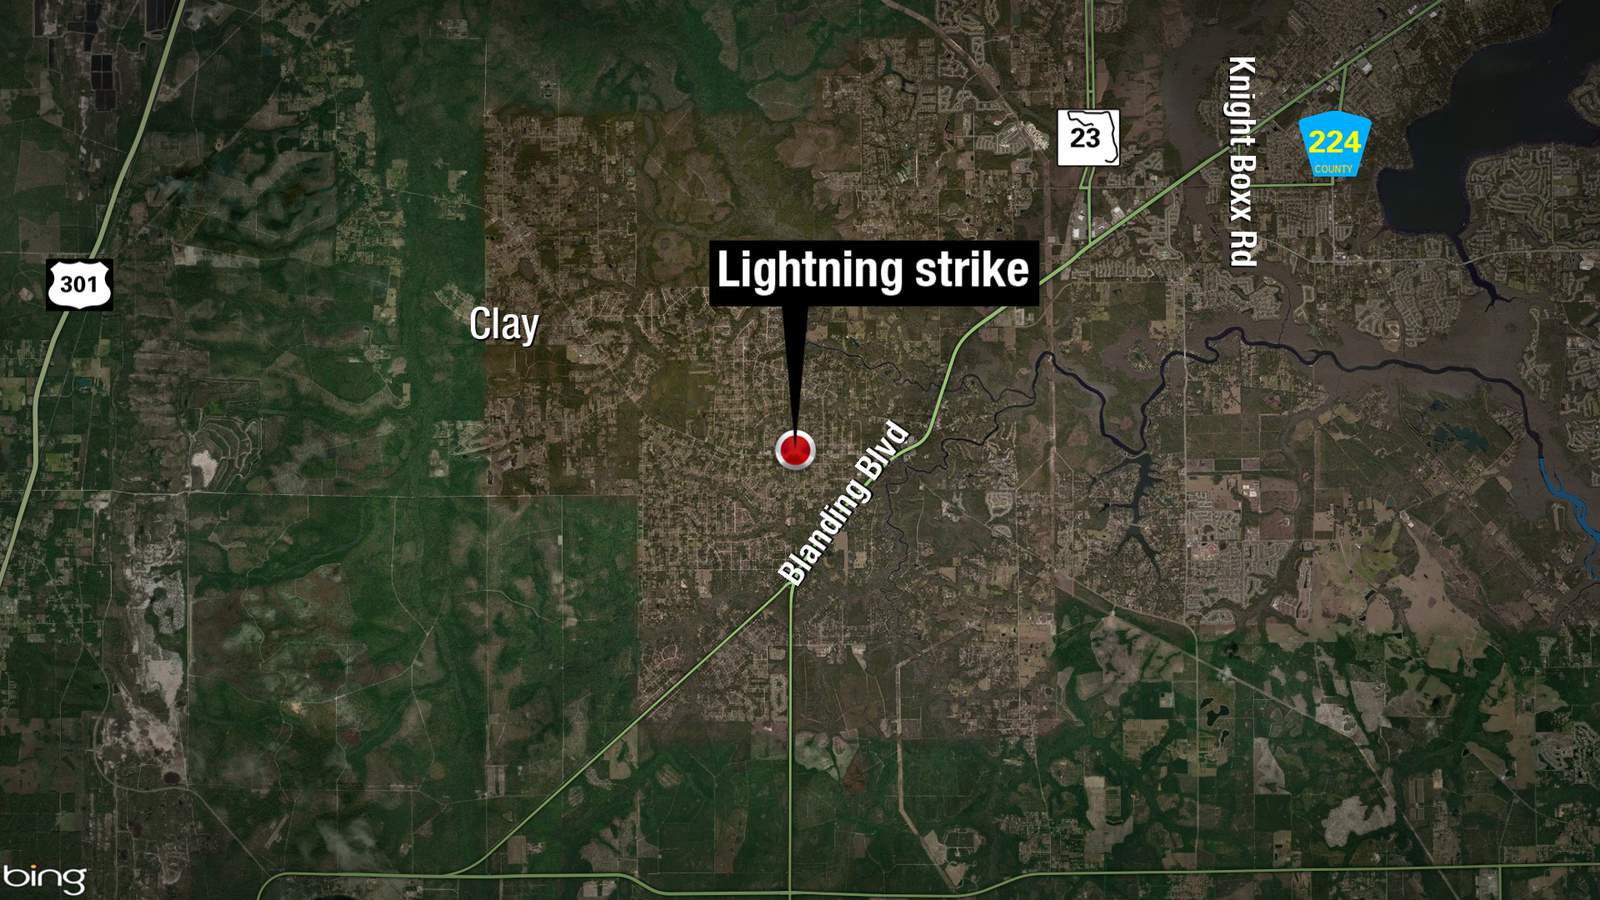 3 hospitalized after lightning strike in Clay County